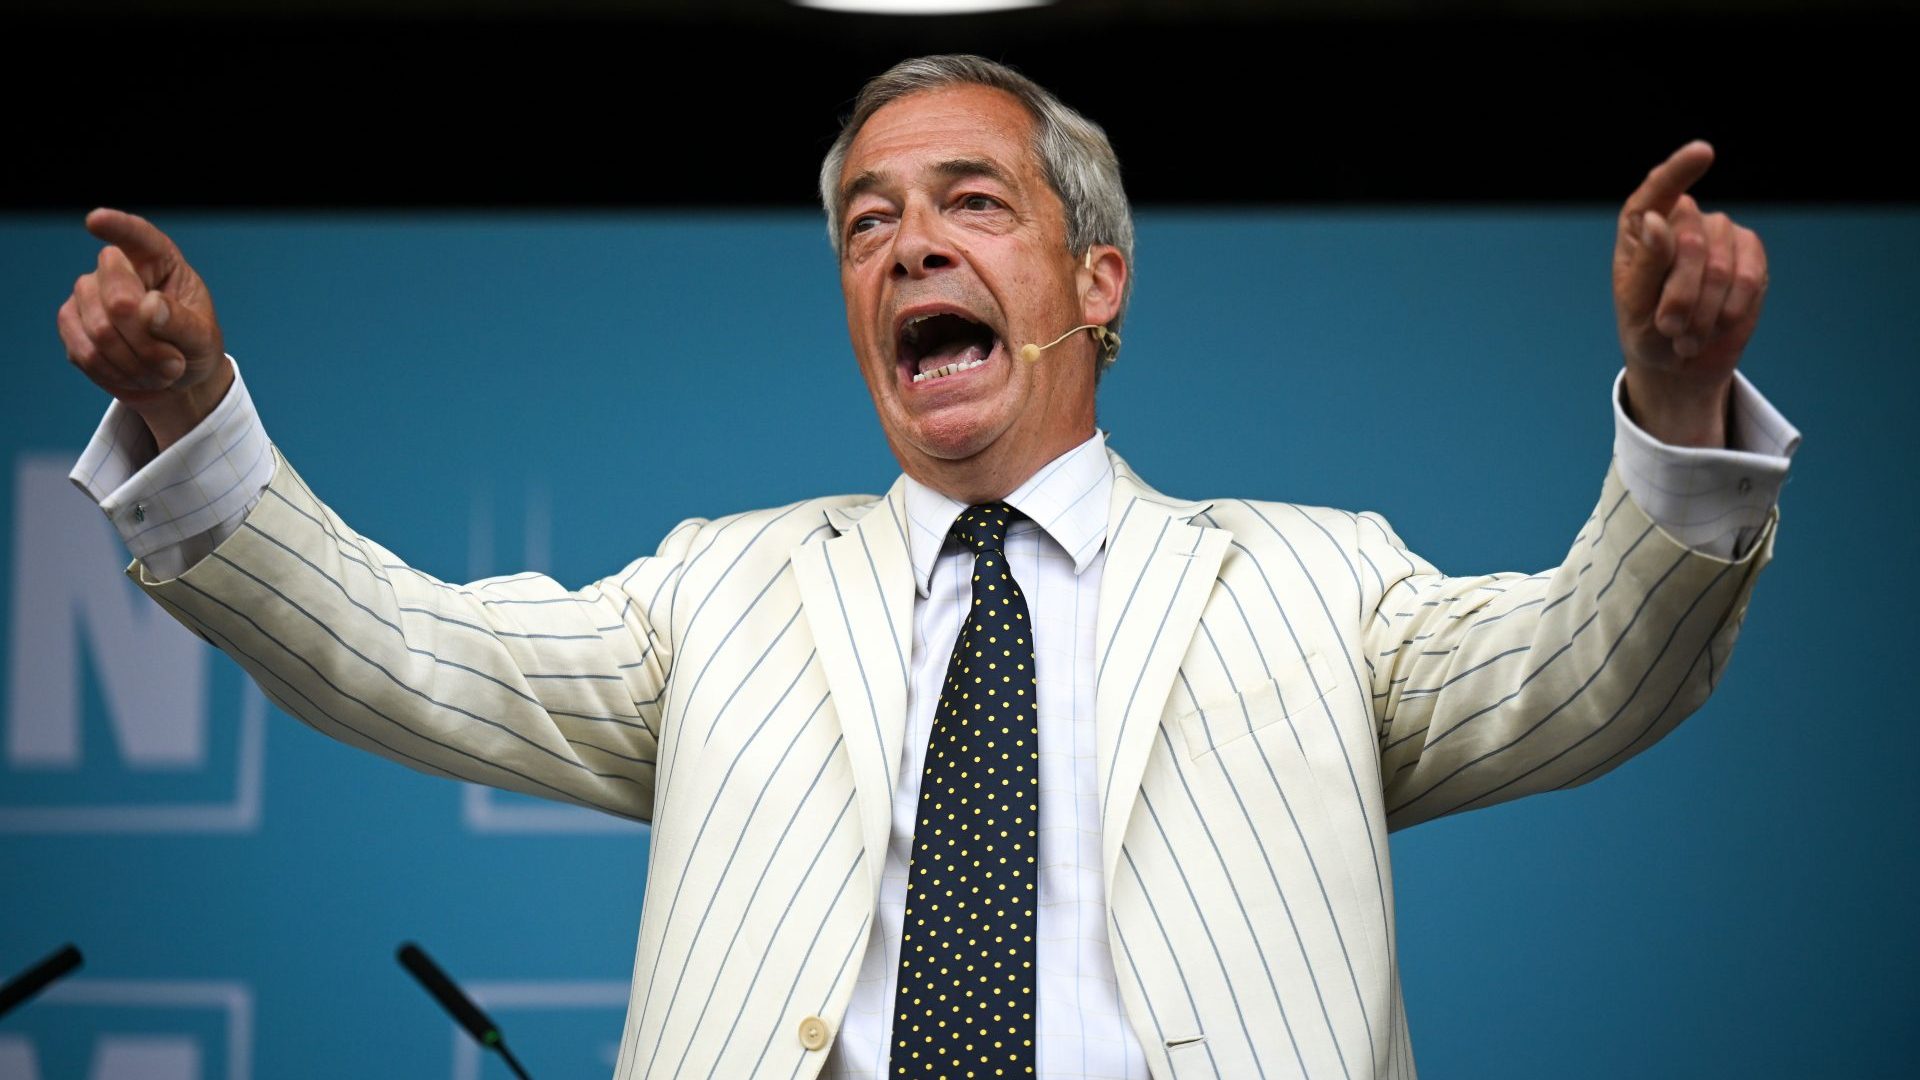 Nigel Farage speaks during an election campaign event in Newton Abbot, Devon  (Photo by Finnbarr Webster/Getty Images)